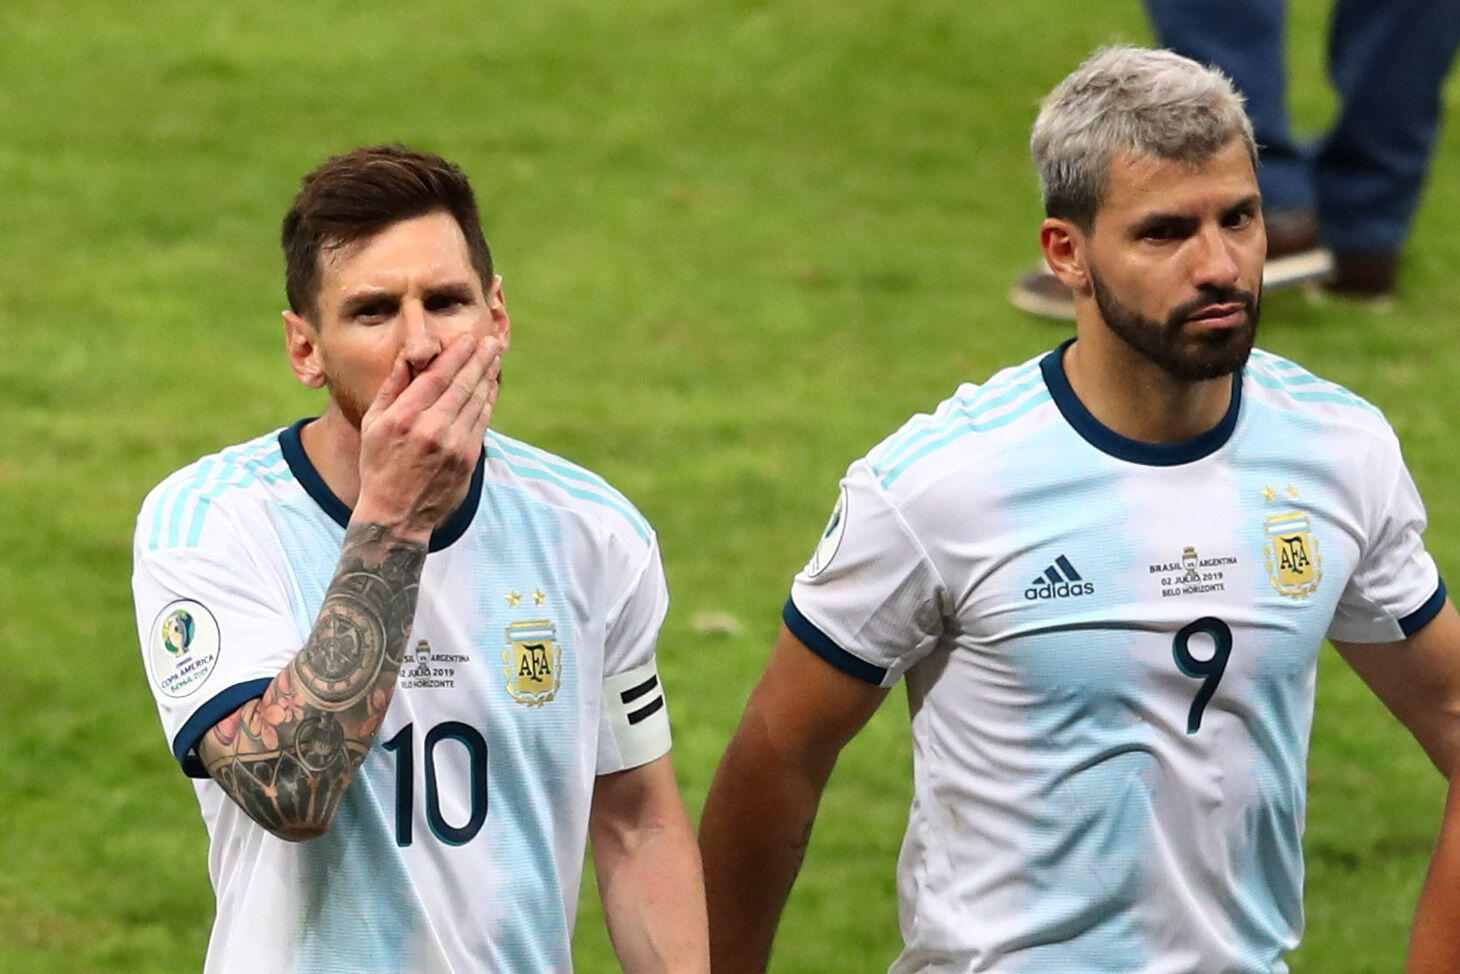 Lionel Messi’s next club ‘leaked’ by Aguero as he reveals private conversation slip